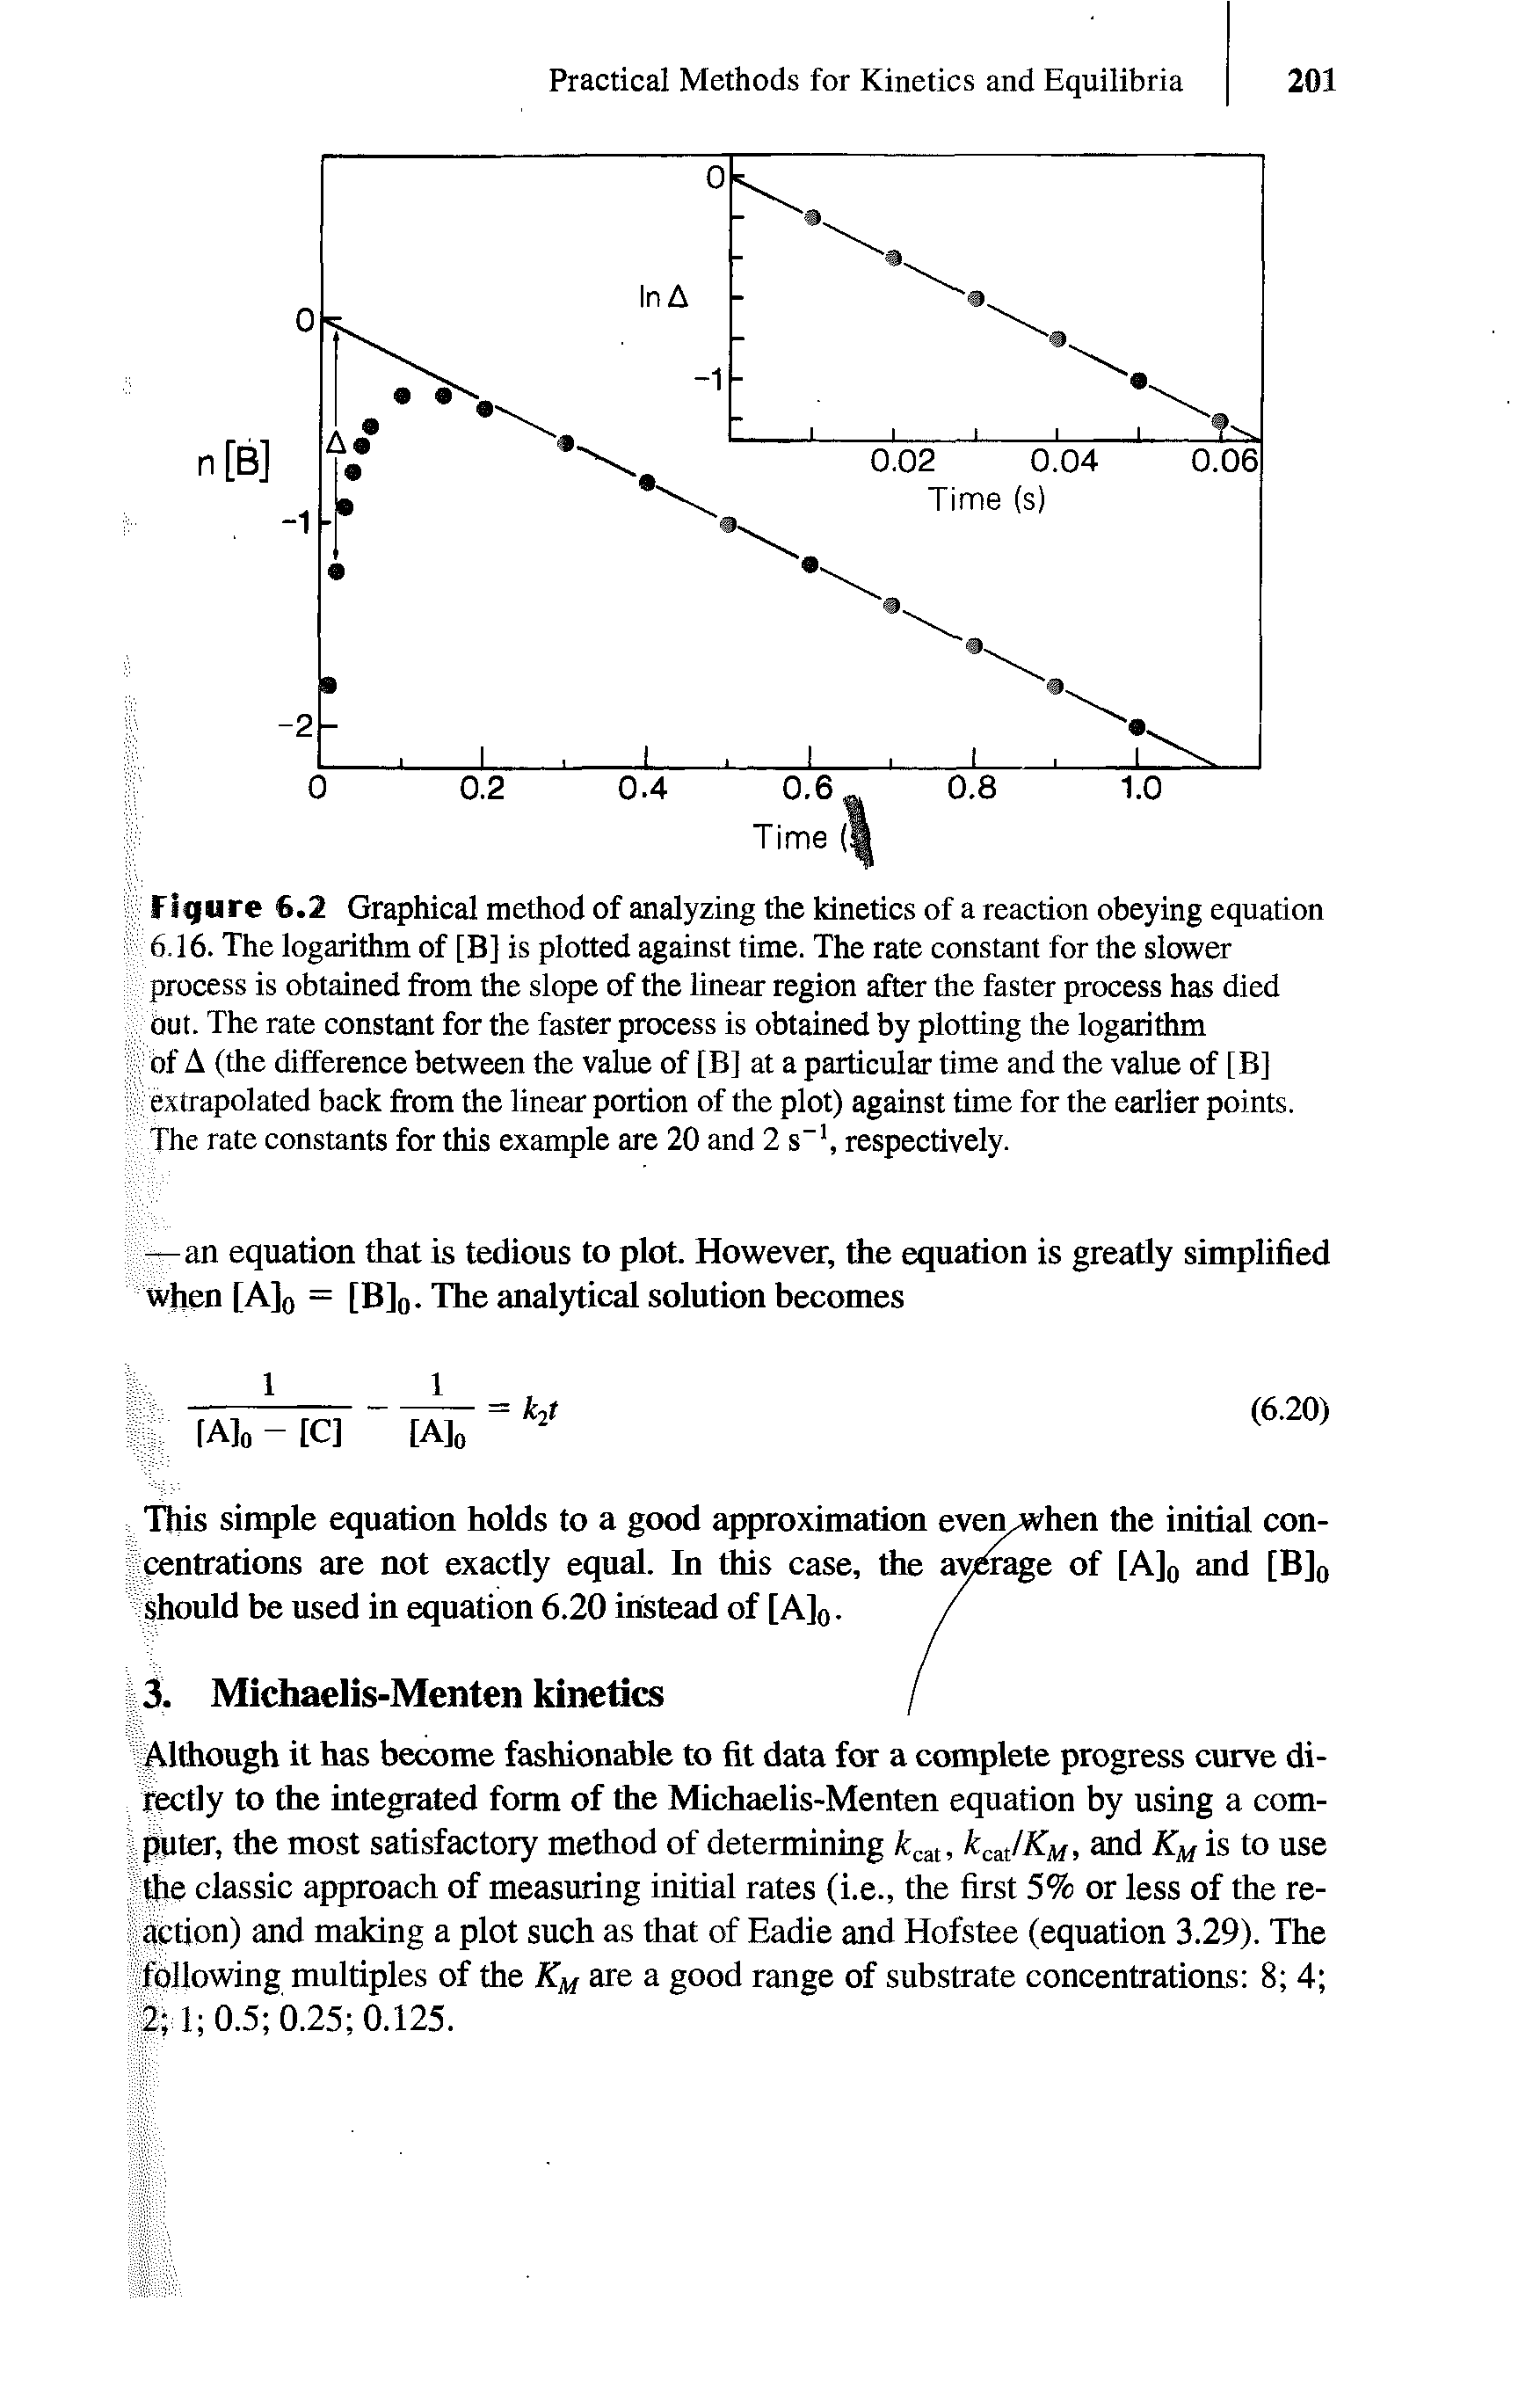 Figure 6.2 Graphical method of analyzing the kinetics of a reaction obeying equation 6.16. The logarithm of [B] is plotted against time. The rate constant for the slower process is obtained from the slope of the linear region after the faster process has died out. The rate constant for the faster process is obtained by plotting the logarithm of A (the difference between the value of [B] at a particular time and the value of [B] extrapolated back from the linear portion of the plot) against time for the earlier points. The rate constants for this example are 20 and 2 s 1, respectively.